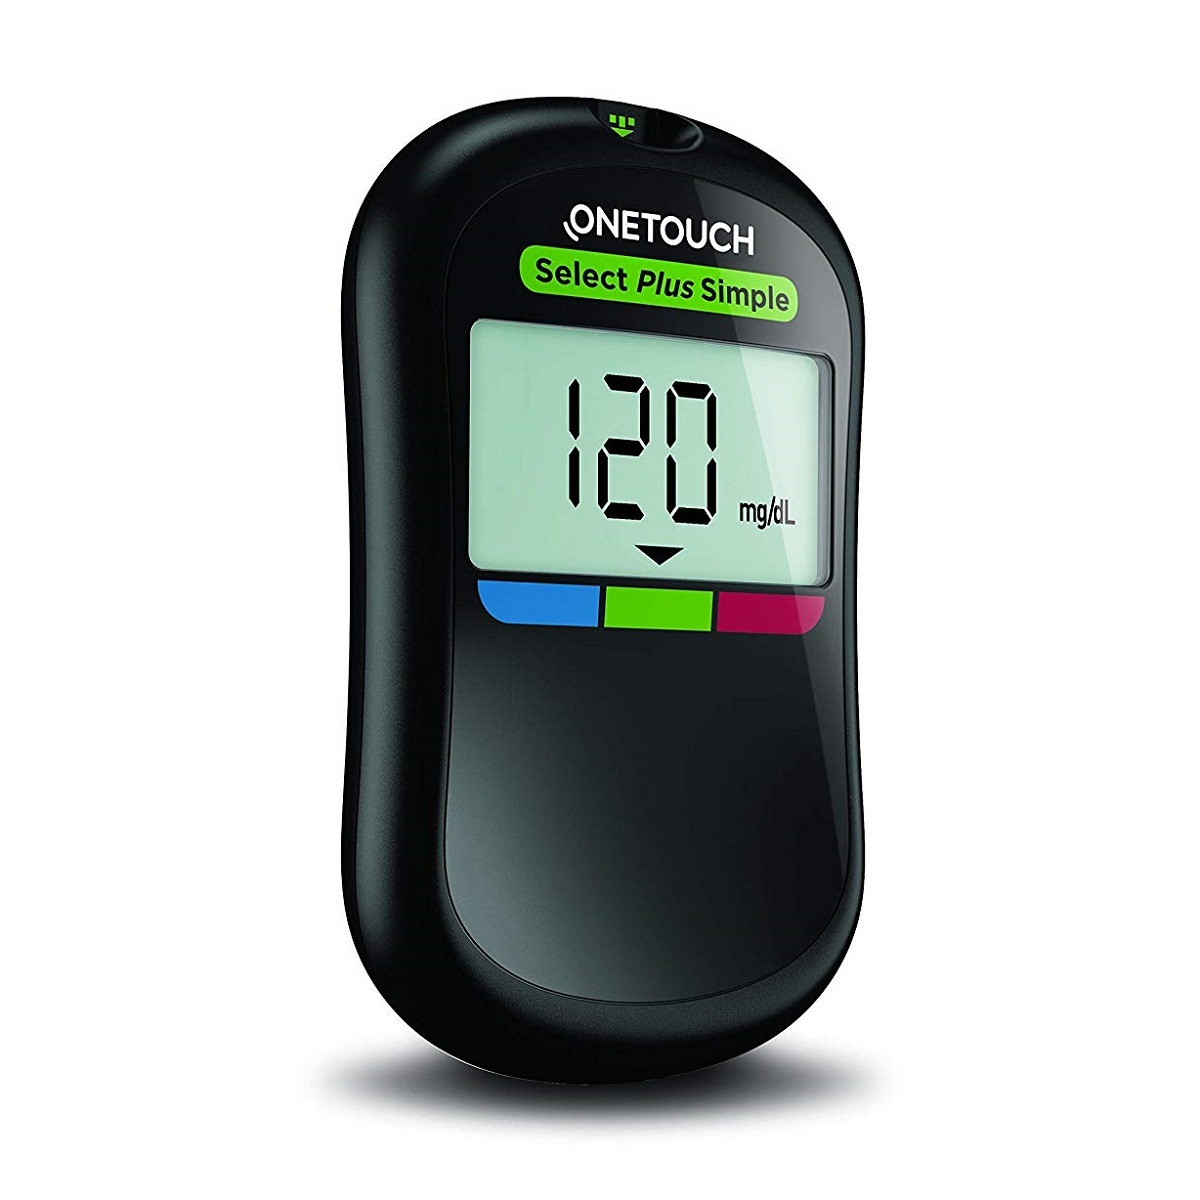 Lifescan OneTouch Select Plus Simple Glucometer Monitor